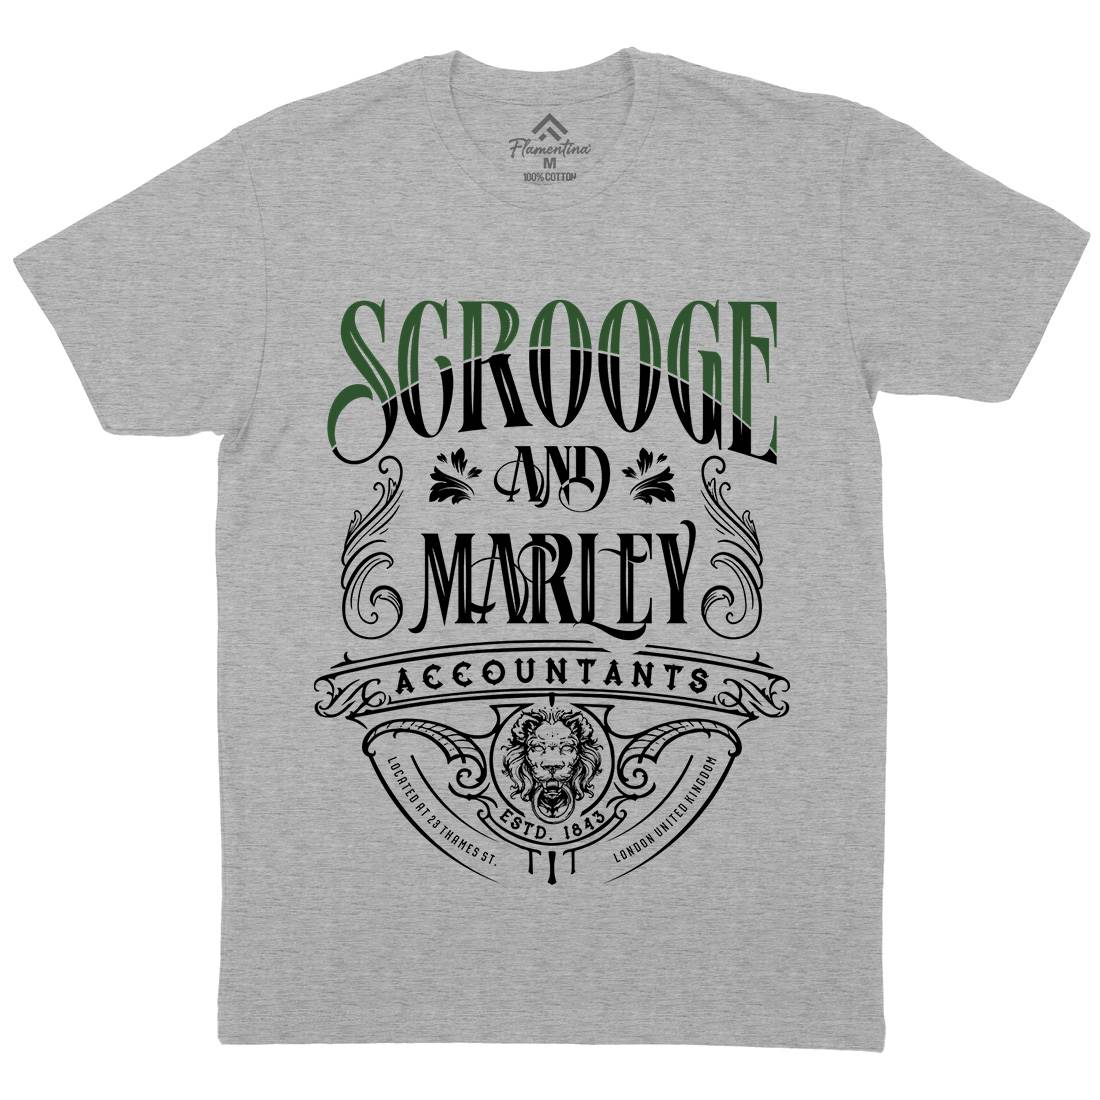 Scrooge And Marley Mens Organic Crew Neck T-Shirt Christmas D100